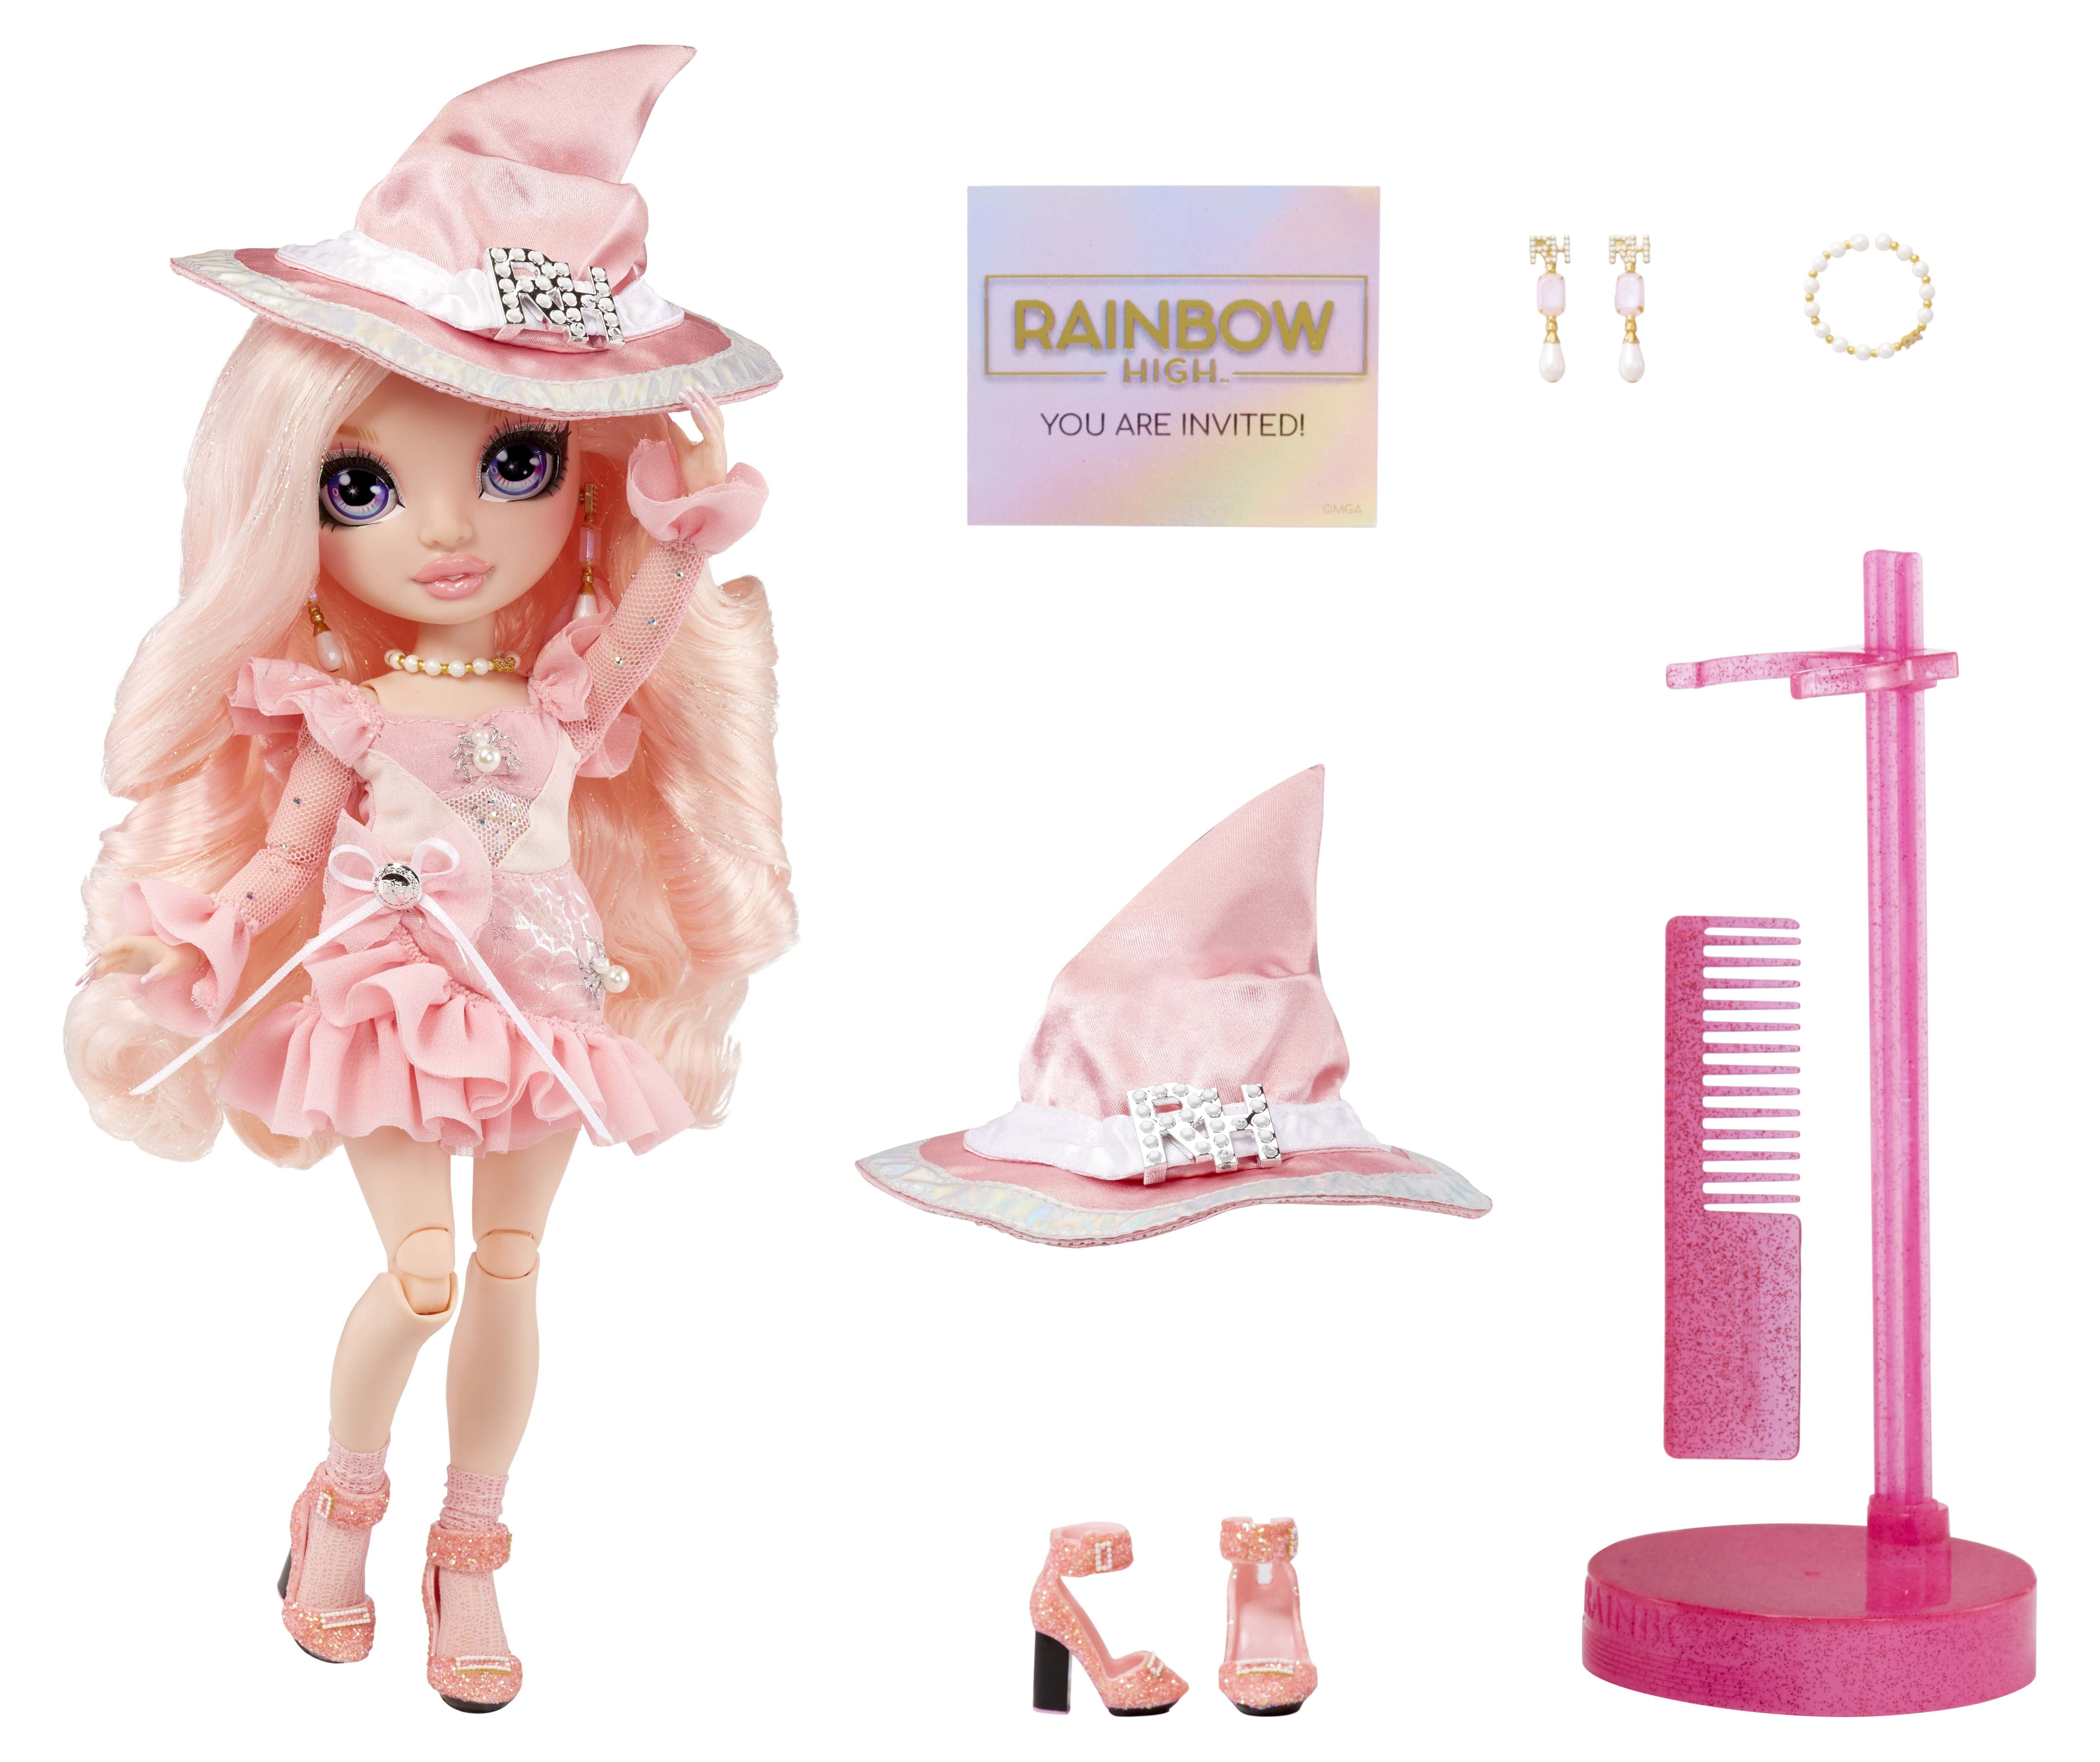 Witch Bella Old COSTUME BALL 11 & Rainbow inch High – Gift Fashion Doll. Parker and 6-12 (Pink) Vision Great Kids Years Collectors for Rainbow Accessories. Costume